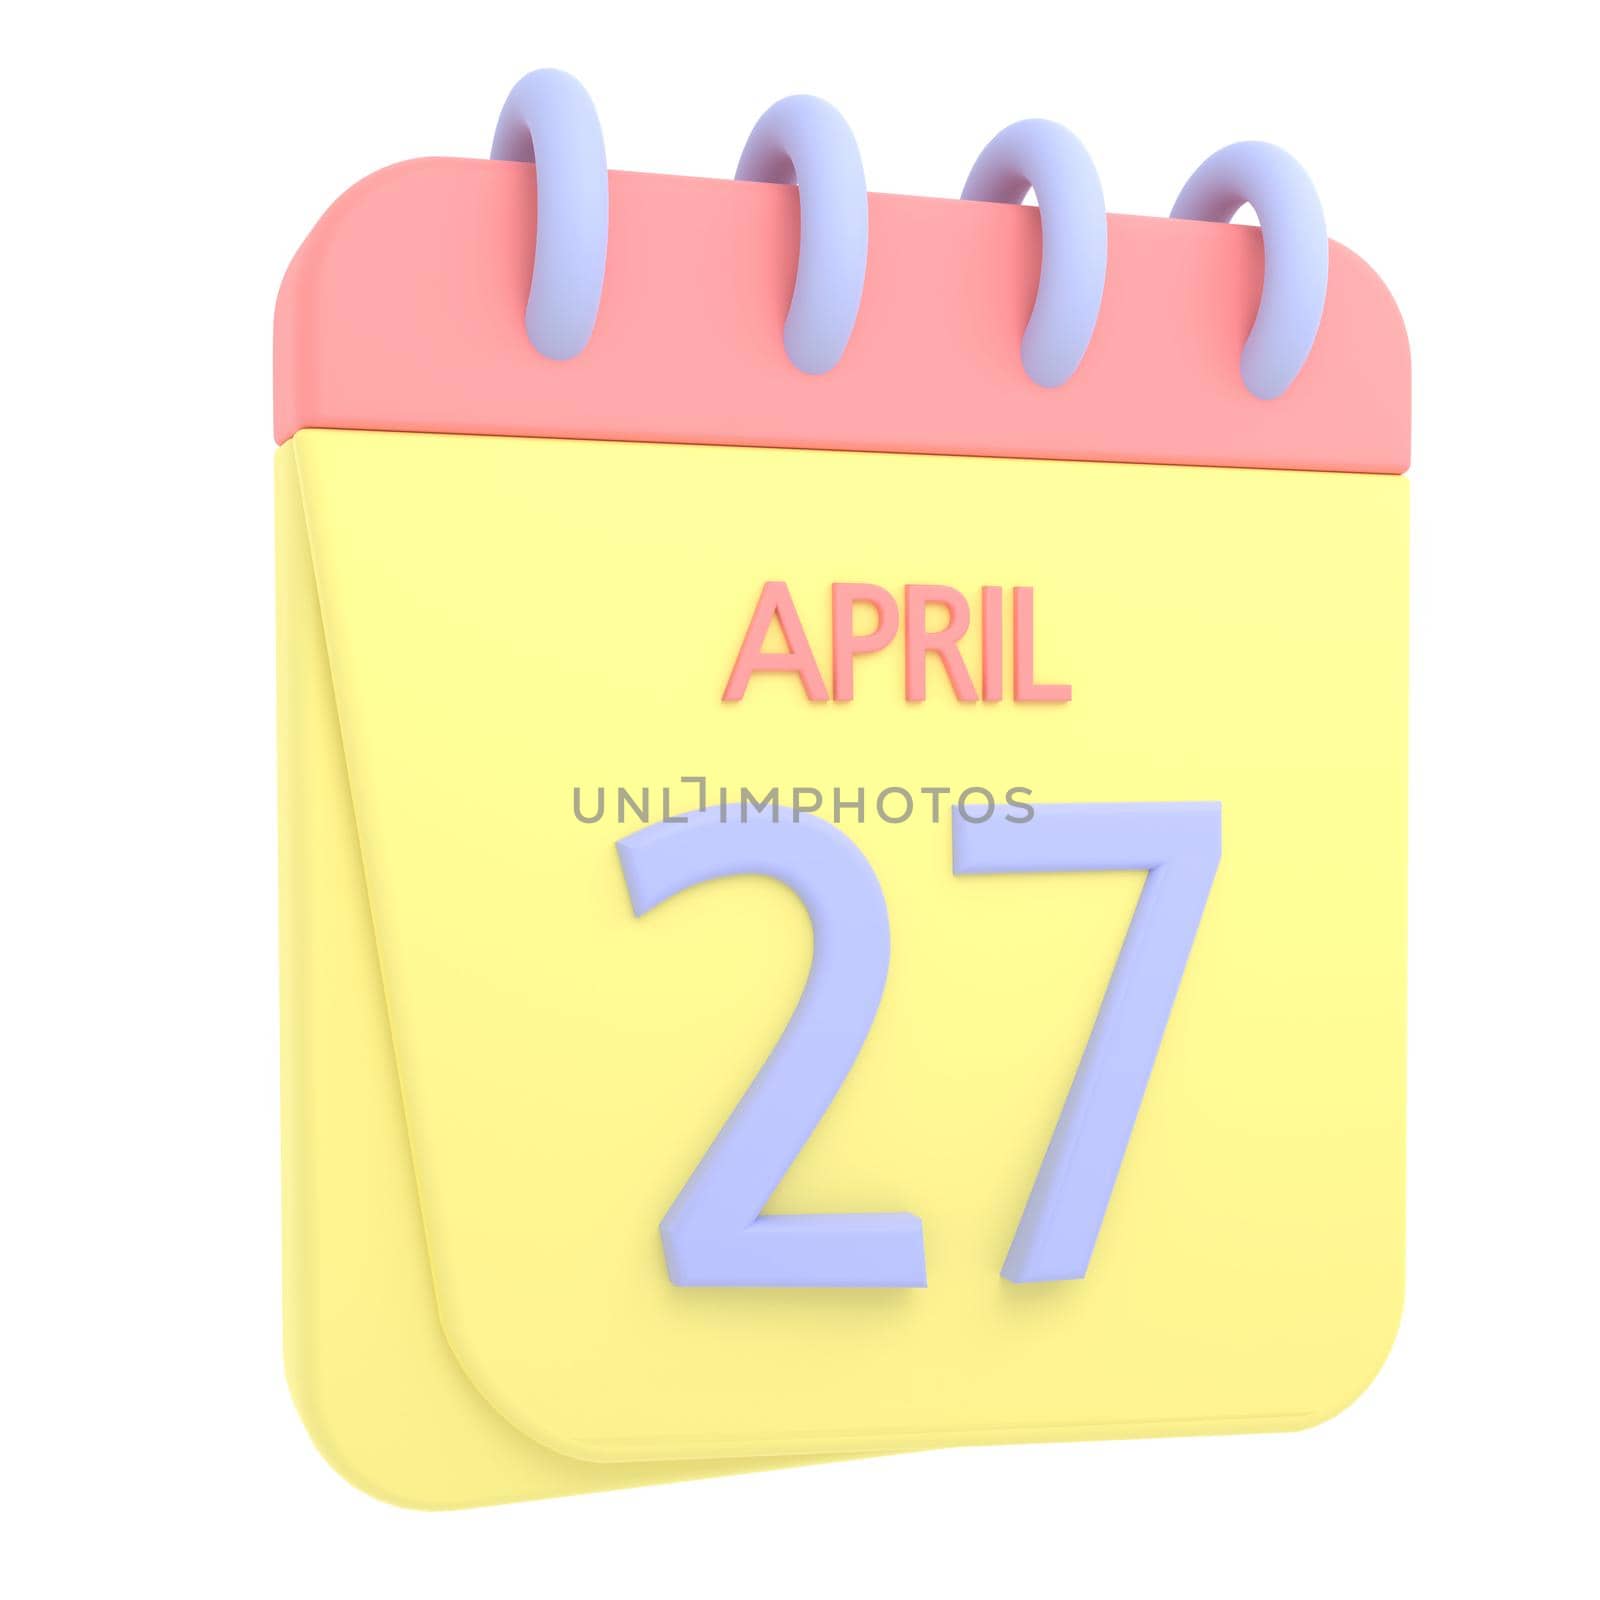 27th April 3D calendar icon. Web style. High resolution image. White background